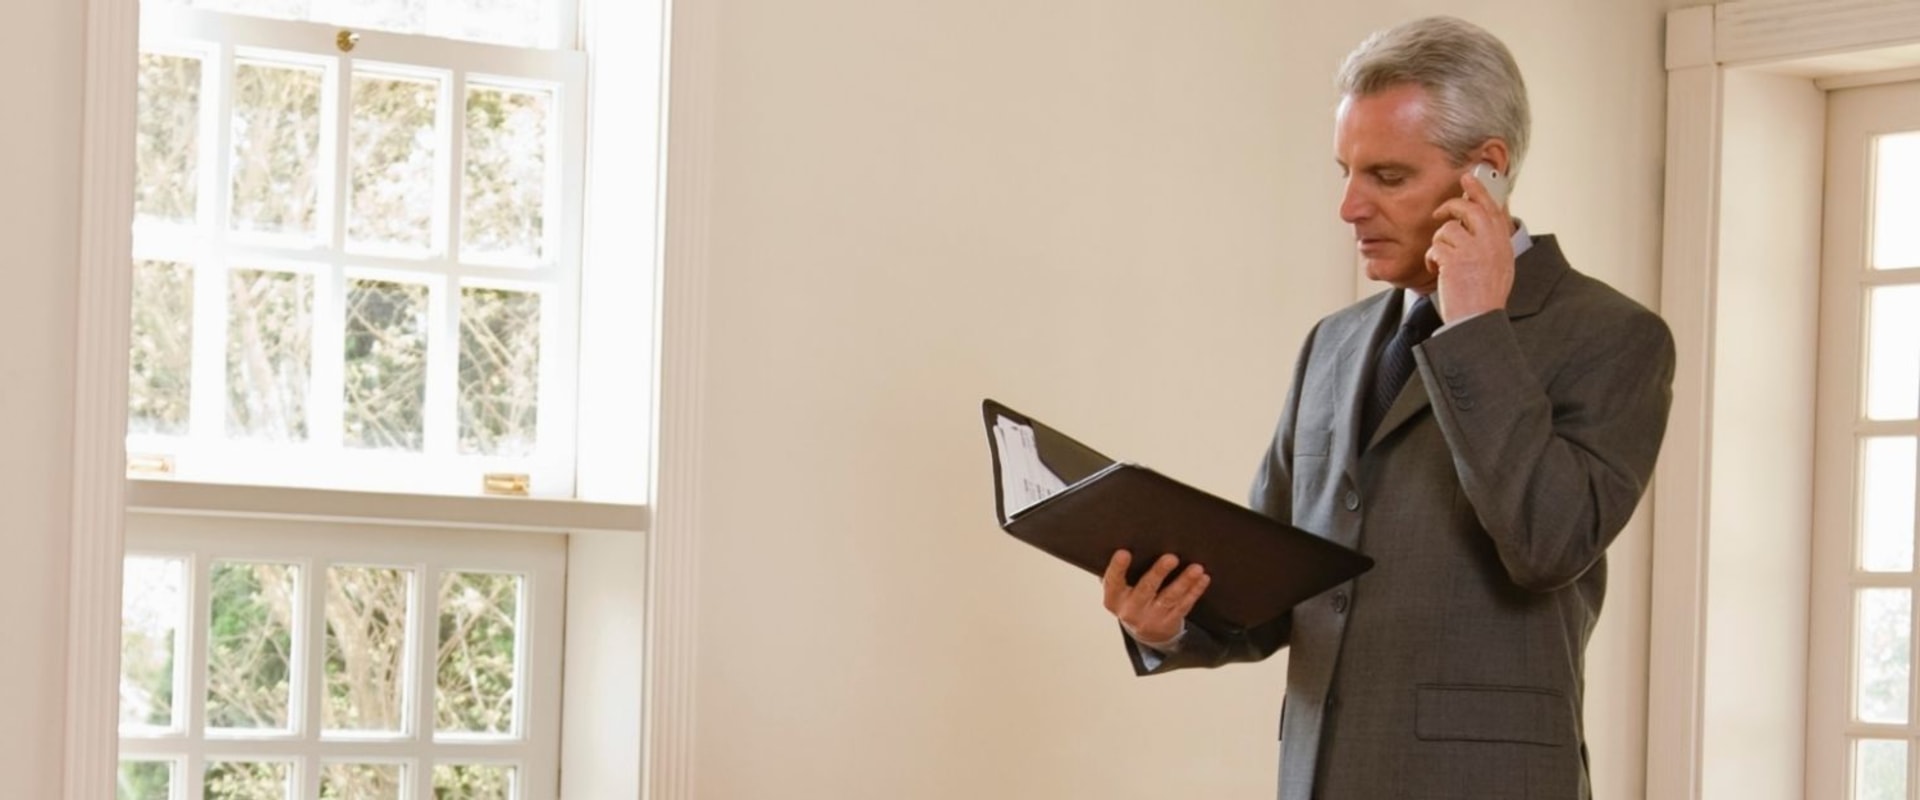 What Are the Responsibilities of a Property Manager?